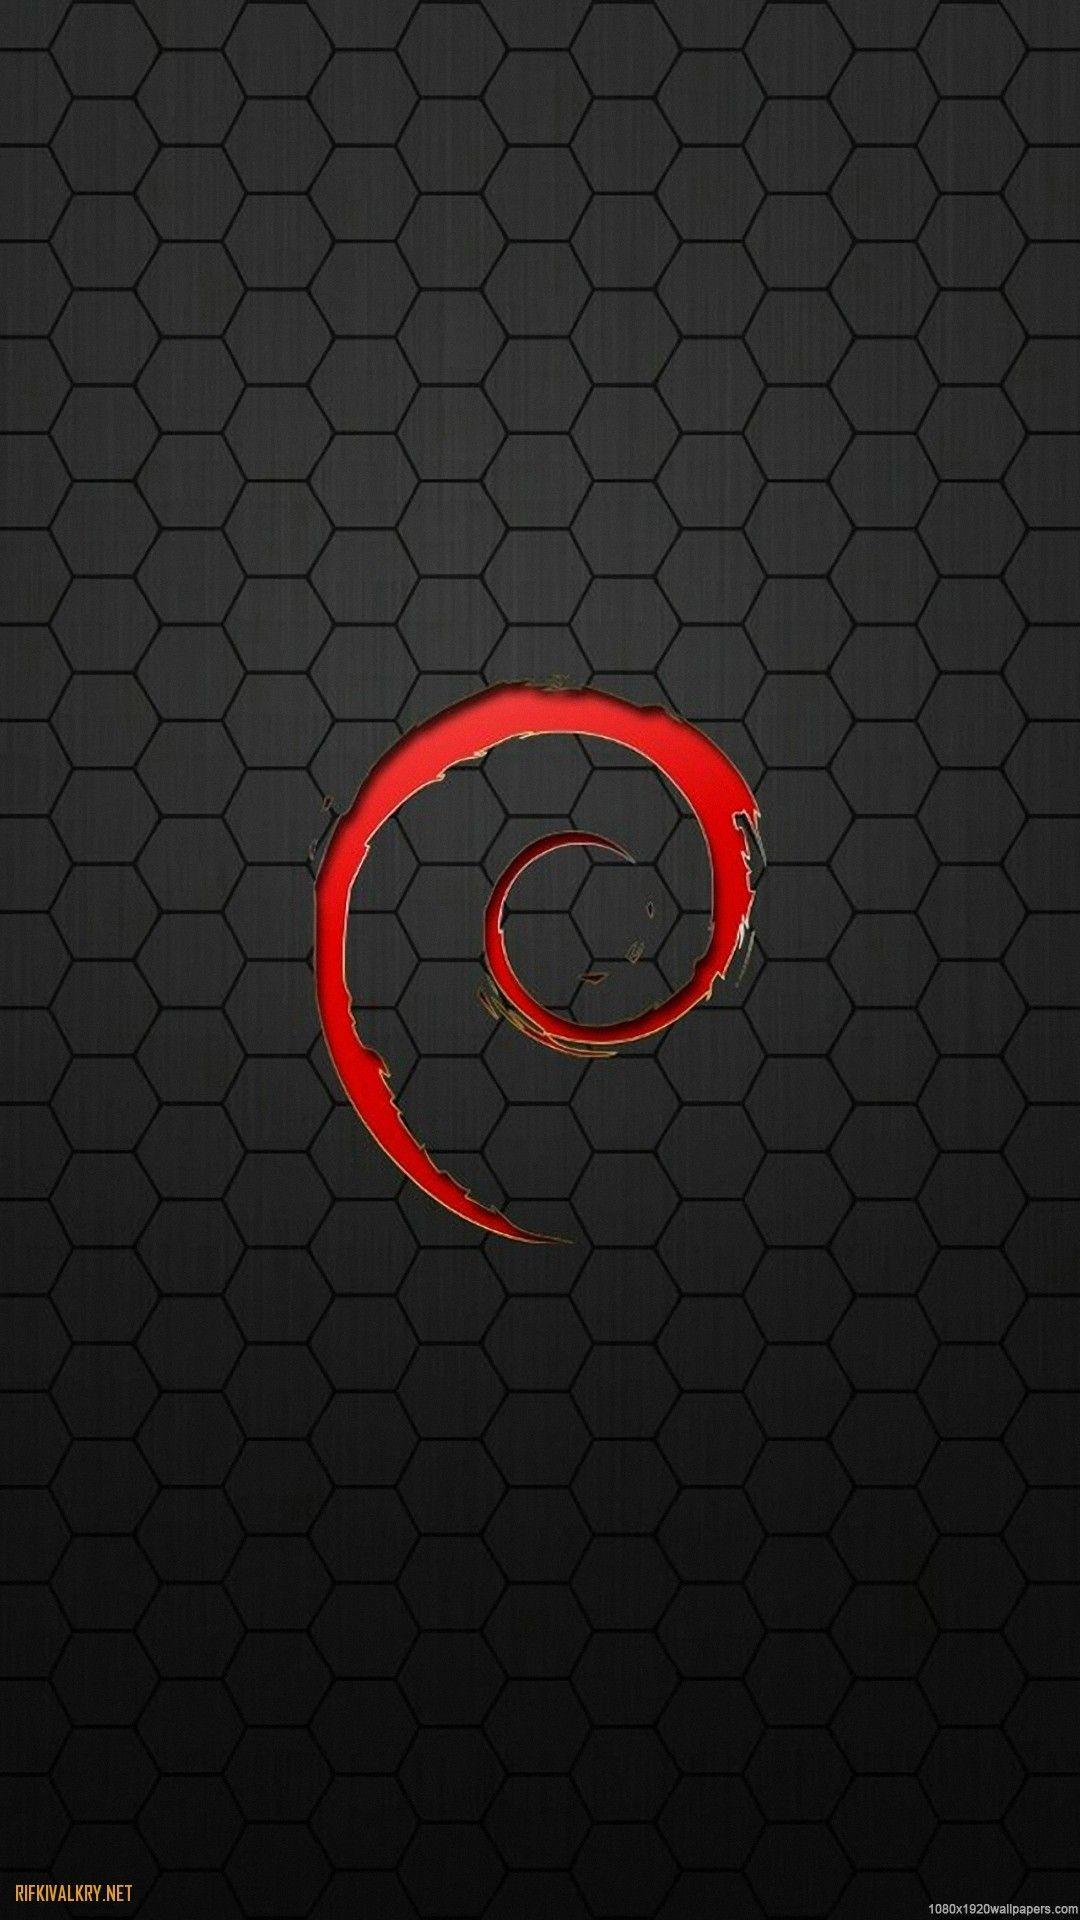 Kali Linux Wallpaper For Android , Find HD Wallpaper For Free